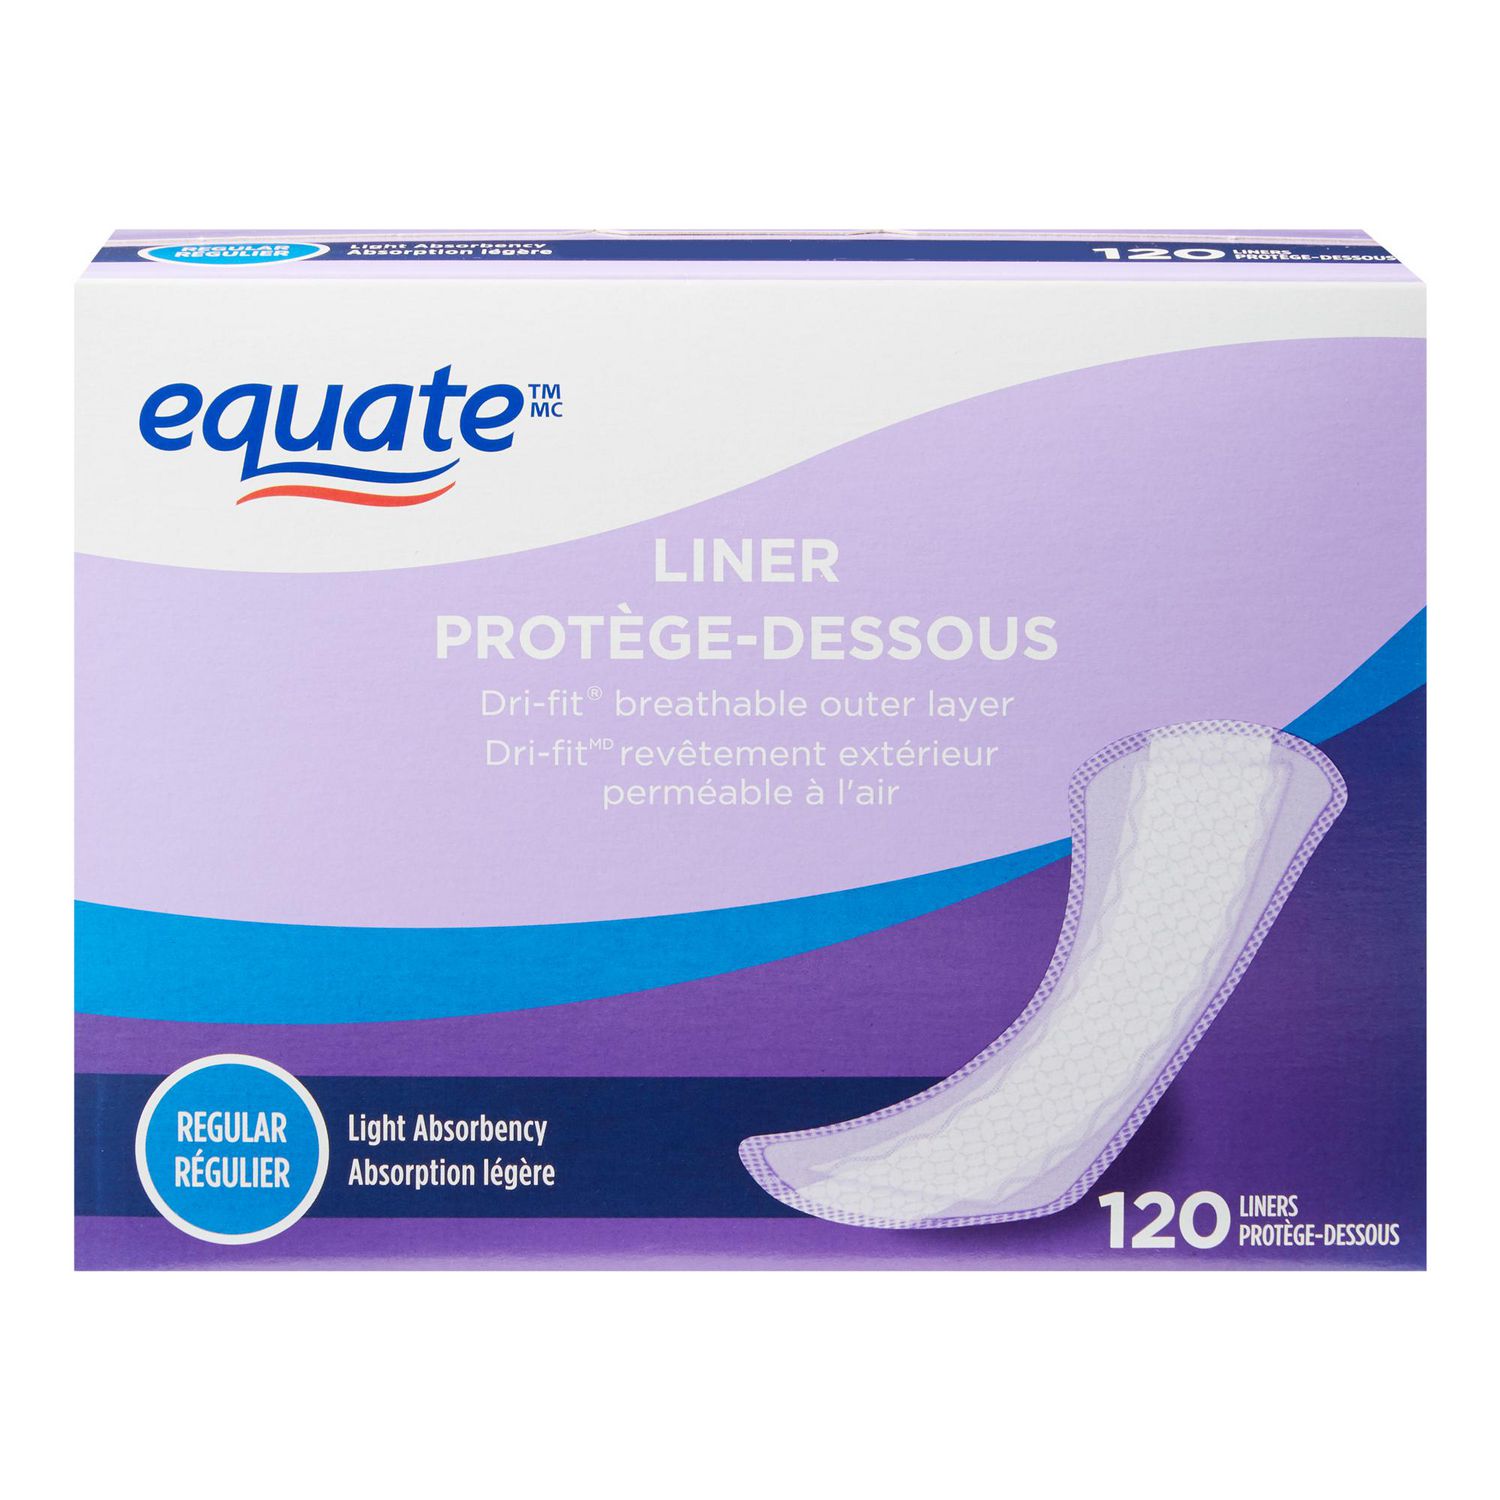 Equate ComfortShape Extra Long Pantiliners, 93ct, Compare to Carefree Body  Shape Pantiliners price in UAE,  UAE